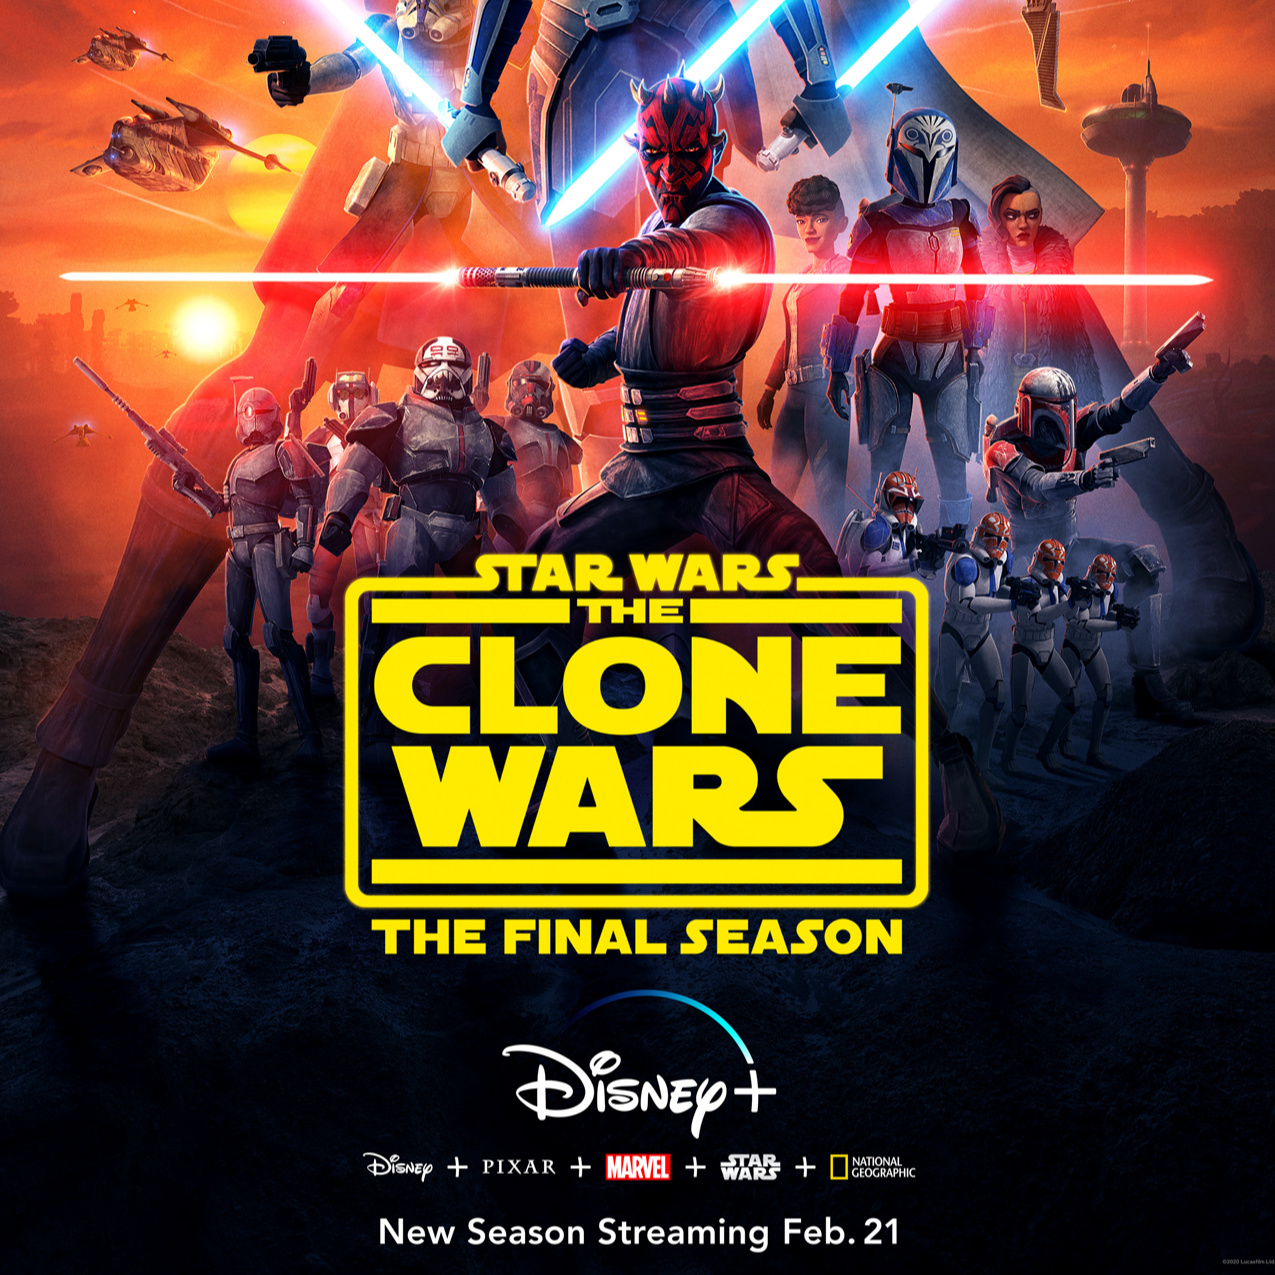 Star Wars: The Clone Wars Returns with New Episodes